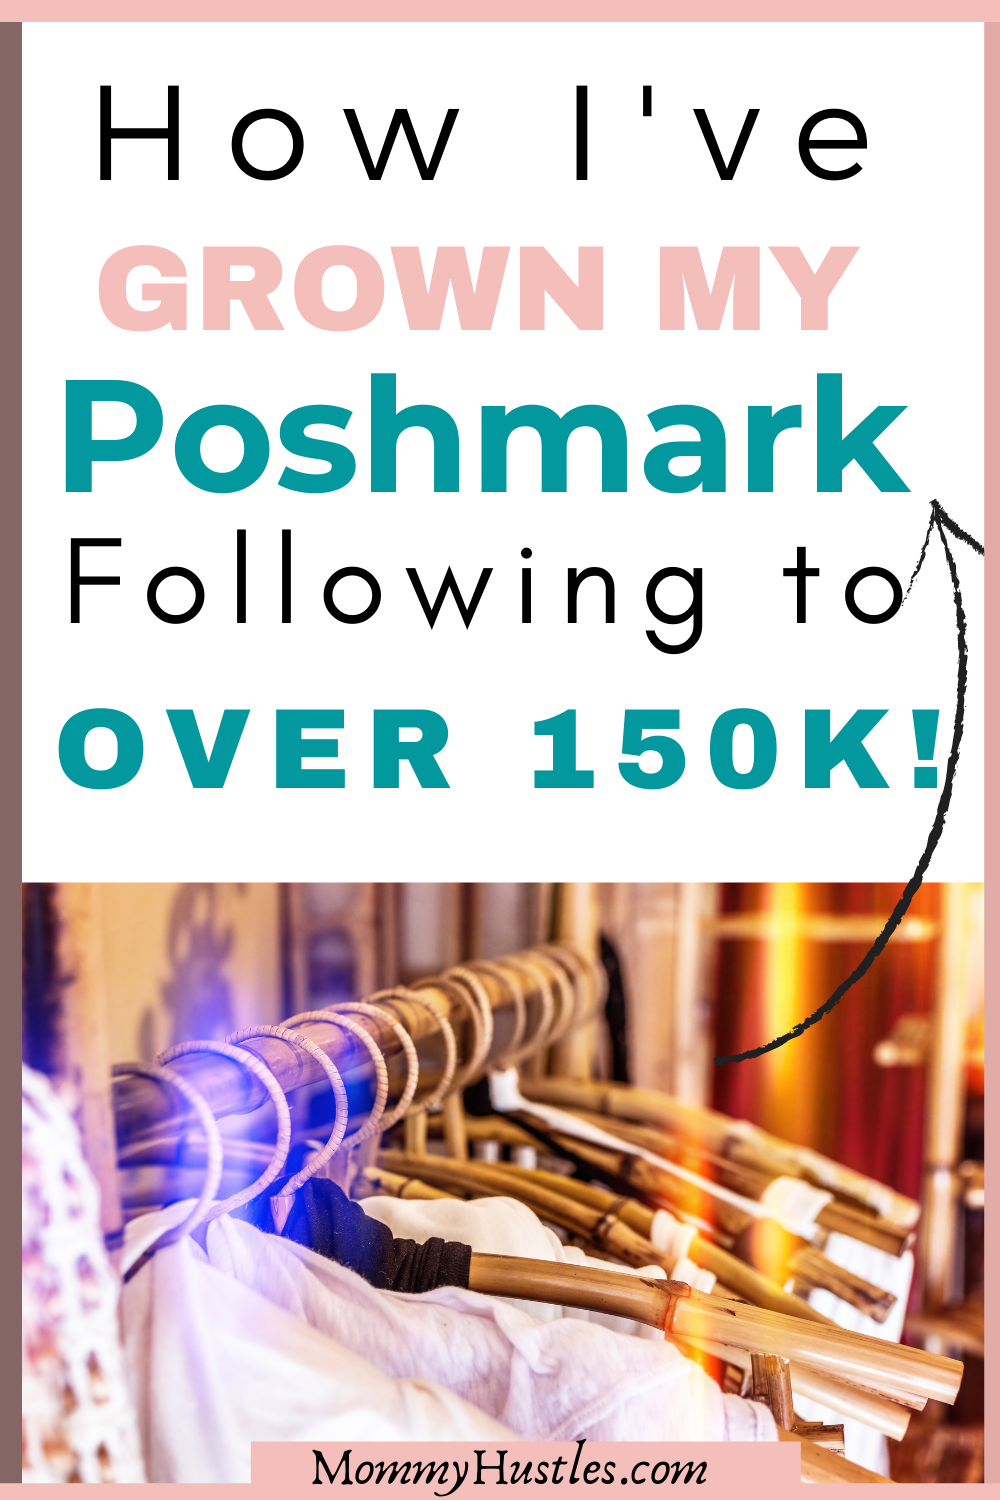 How I’ve Grown my Poshmark Following to Over 180K & How You Can, Too!